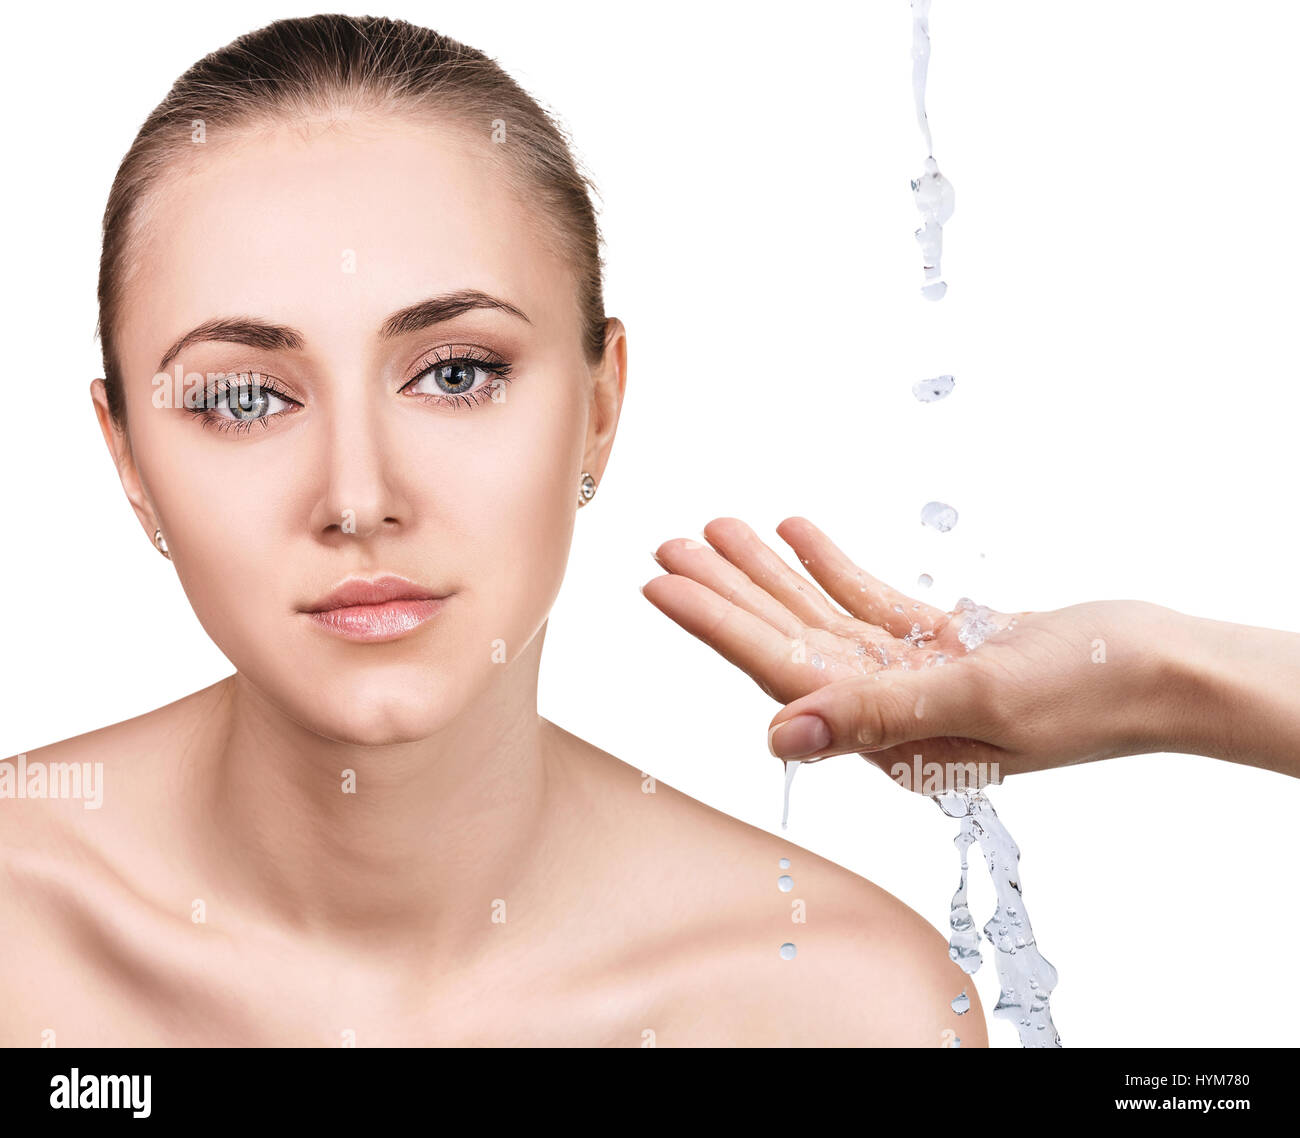 Woman face and pouring water in hand. Stock Photo